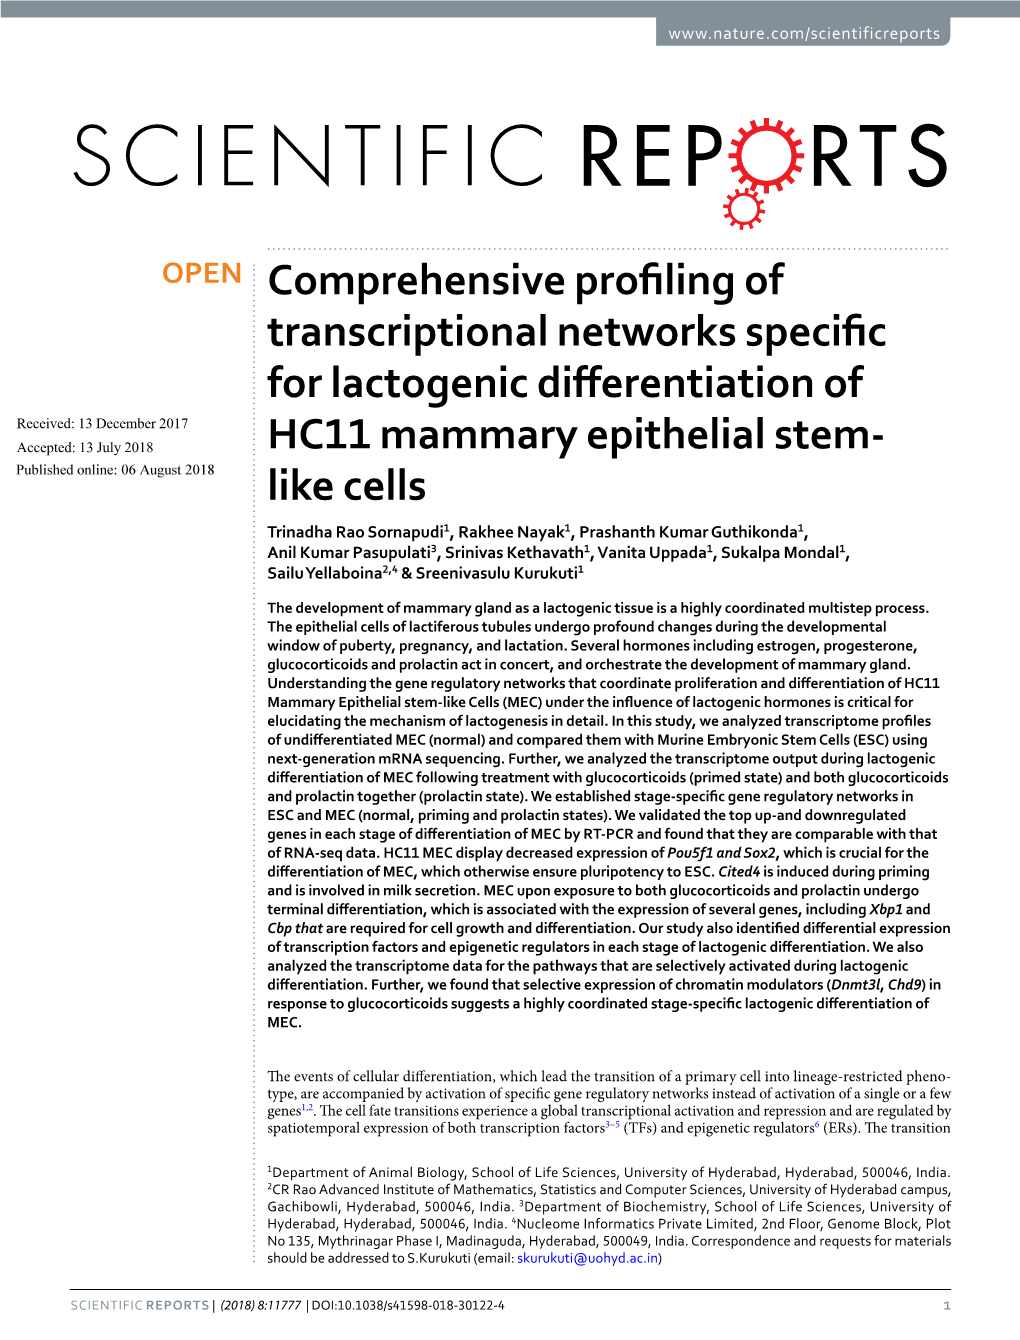 Comprehensive Profiling of Transcriptional Networks Specific For